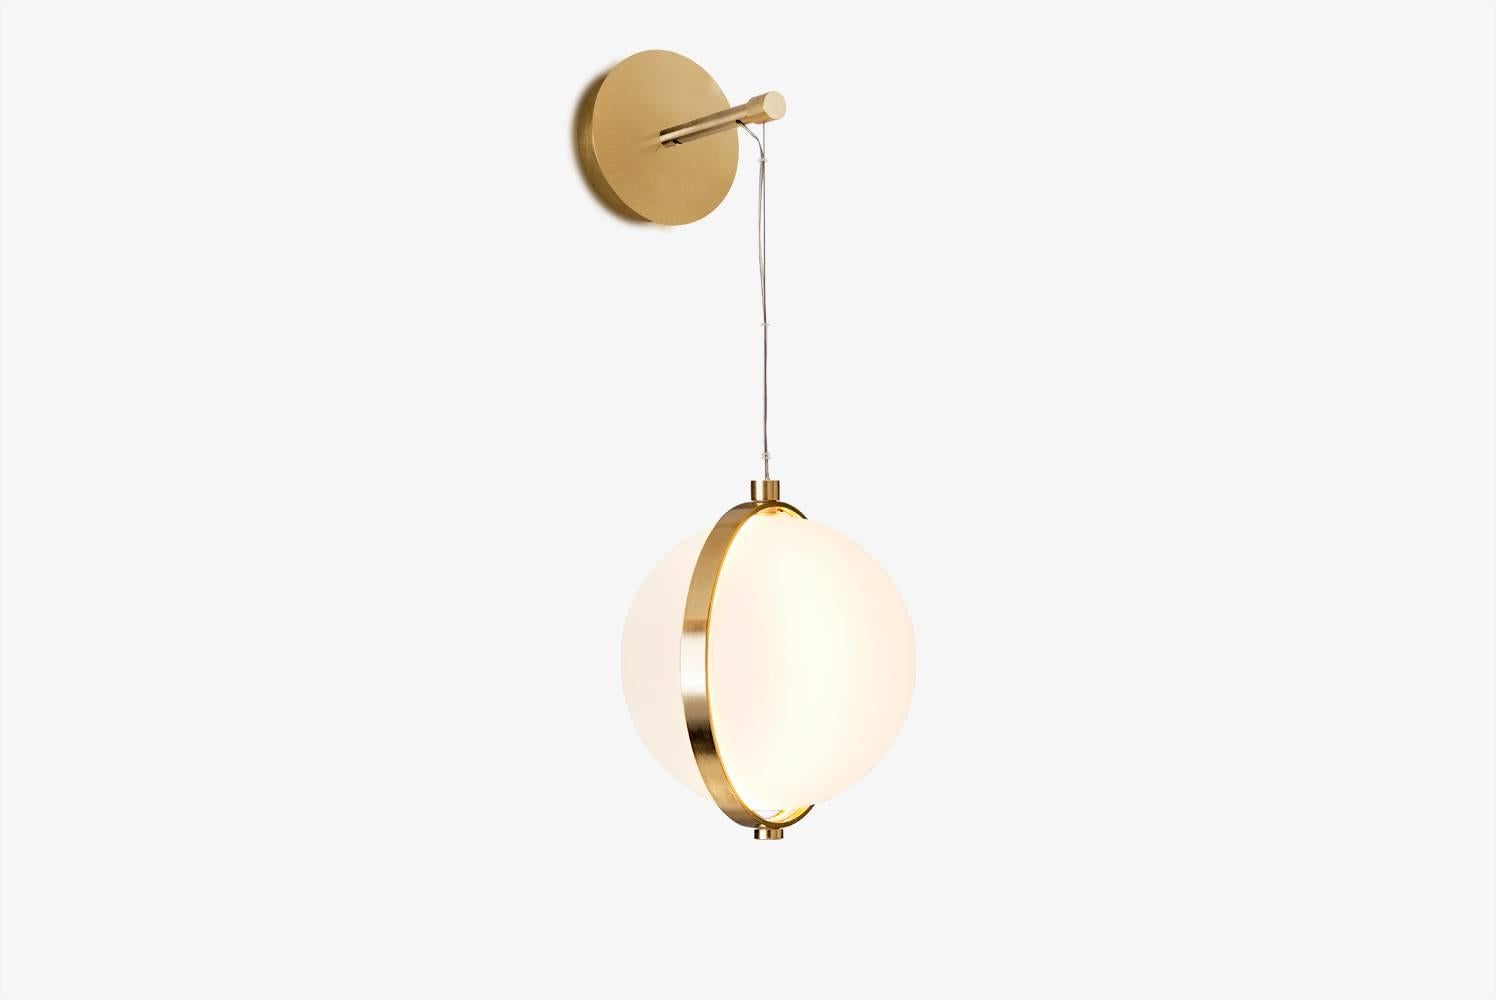 The Orion wall light is one of the latest families in the evolution of the Flexus series by Baroncelli. 

Flexus is a lighting system that comprises a palette of abstracted lines, curves and circles. Echoing the language of modernist modular